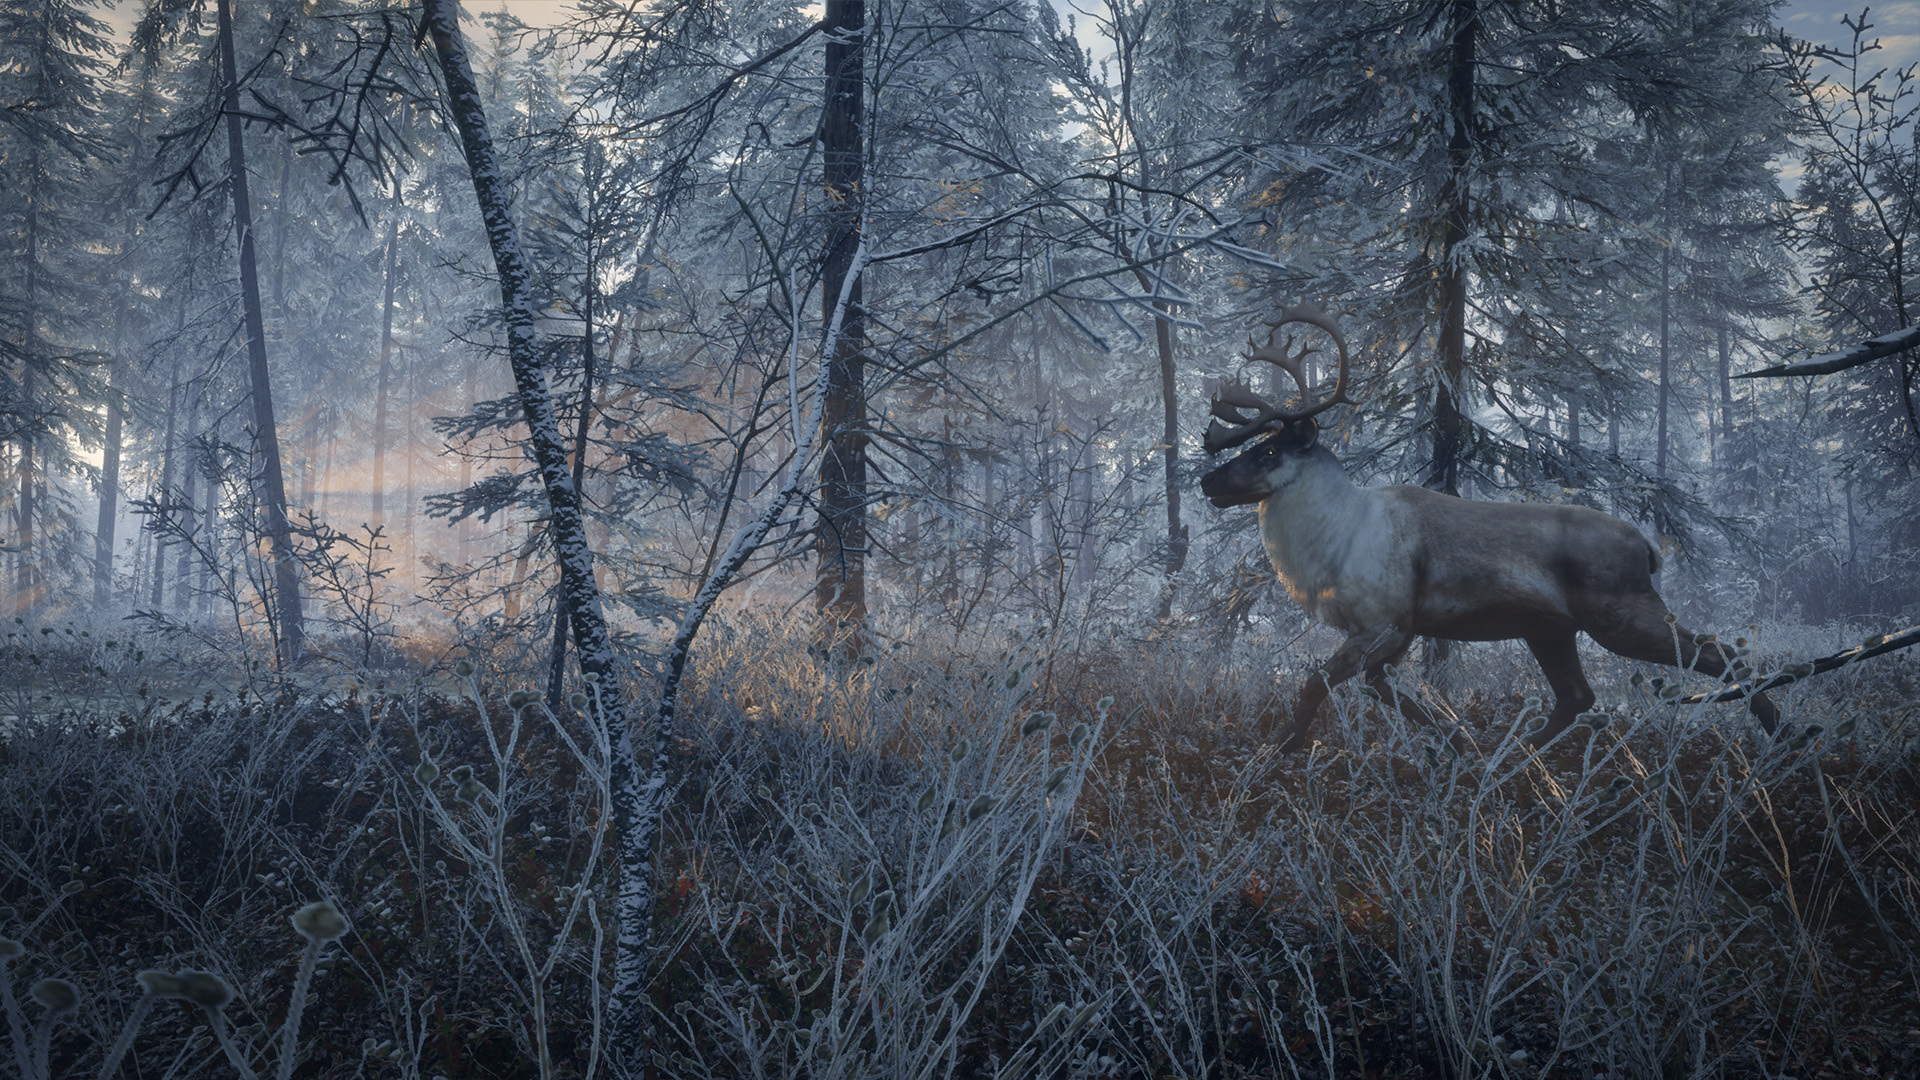 Taiga Animals: List Of Animals That Live In The Taiga Biome With